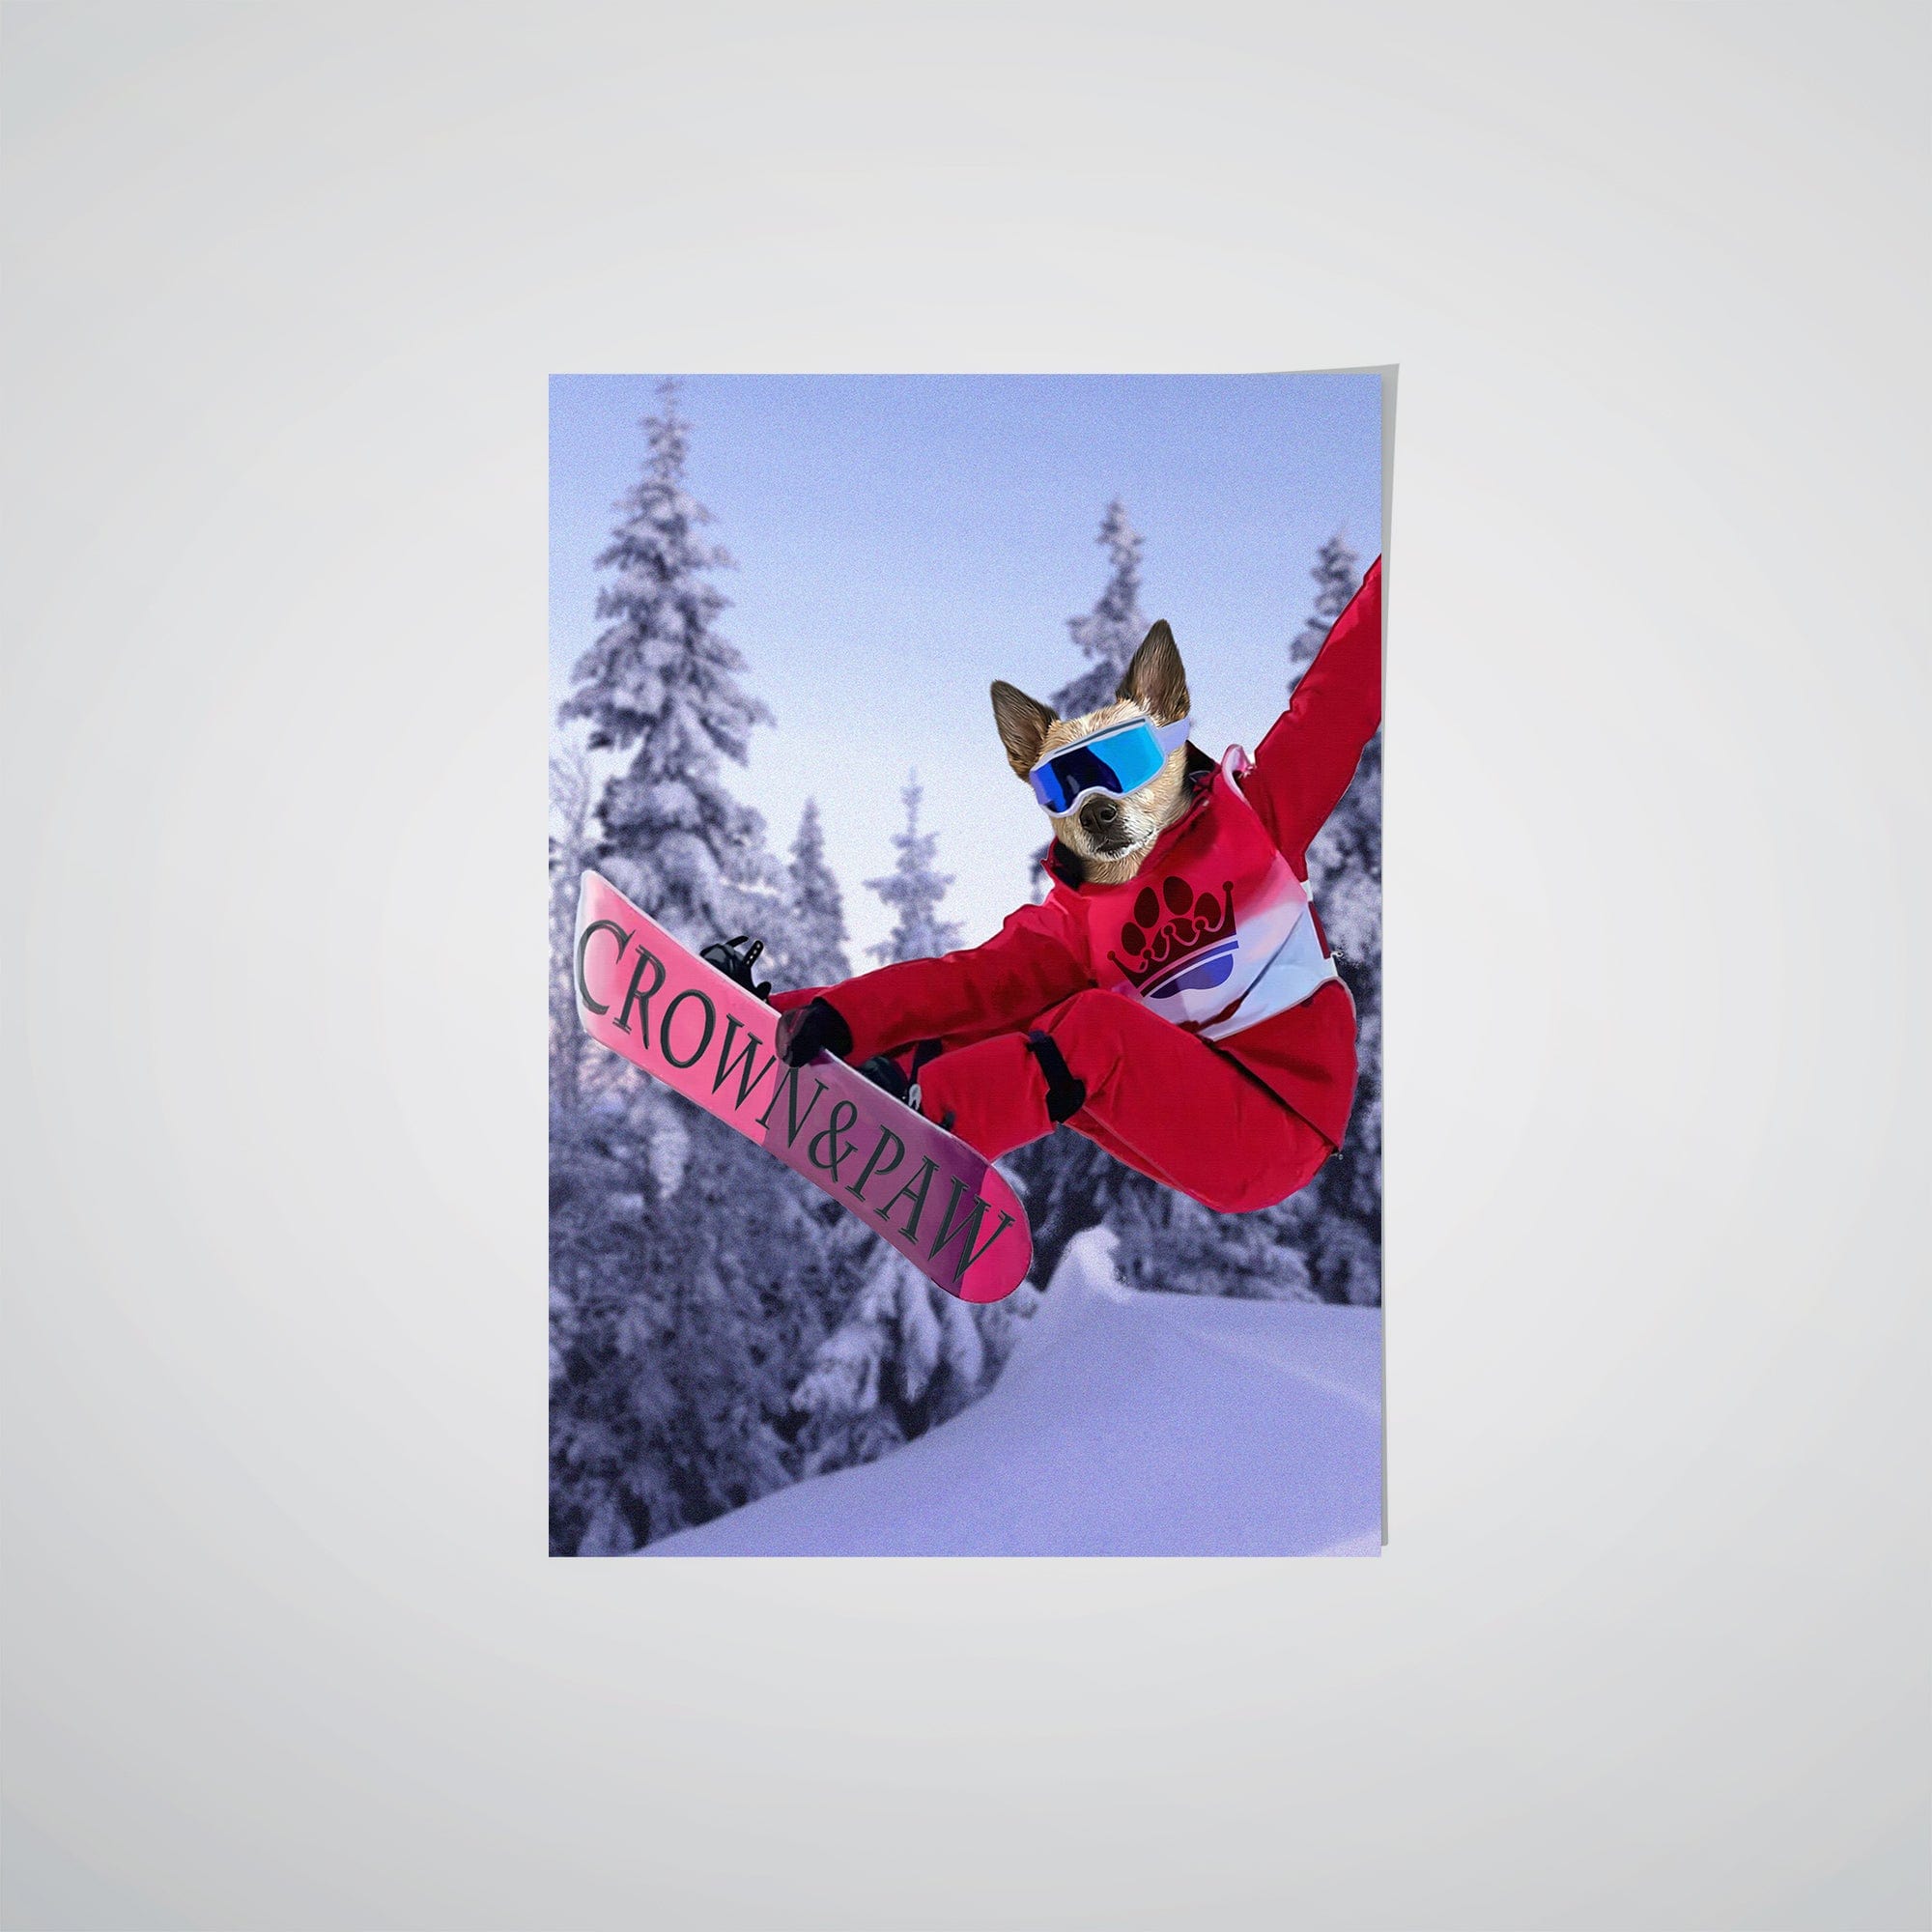 The Snowboarder - Custom Pet Poster